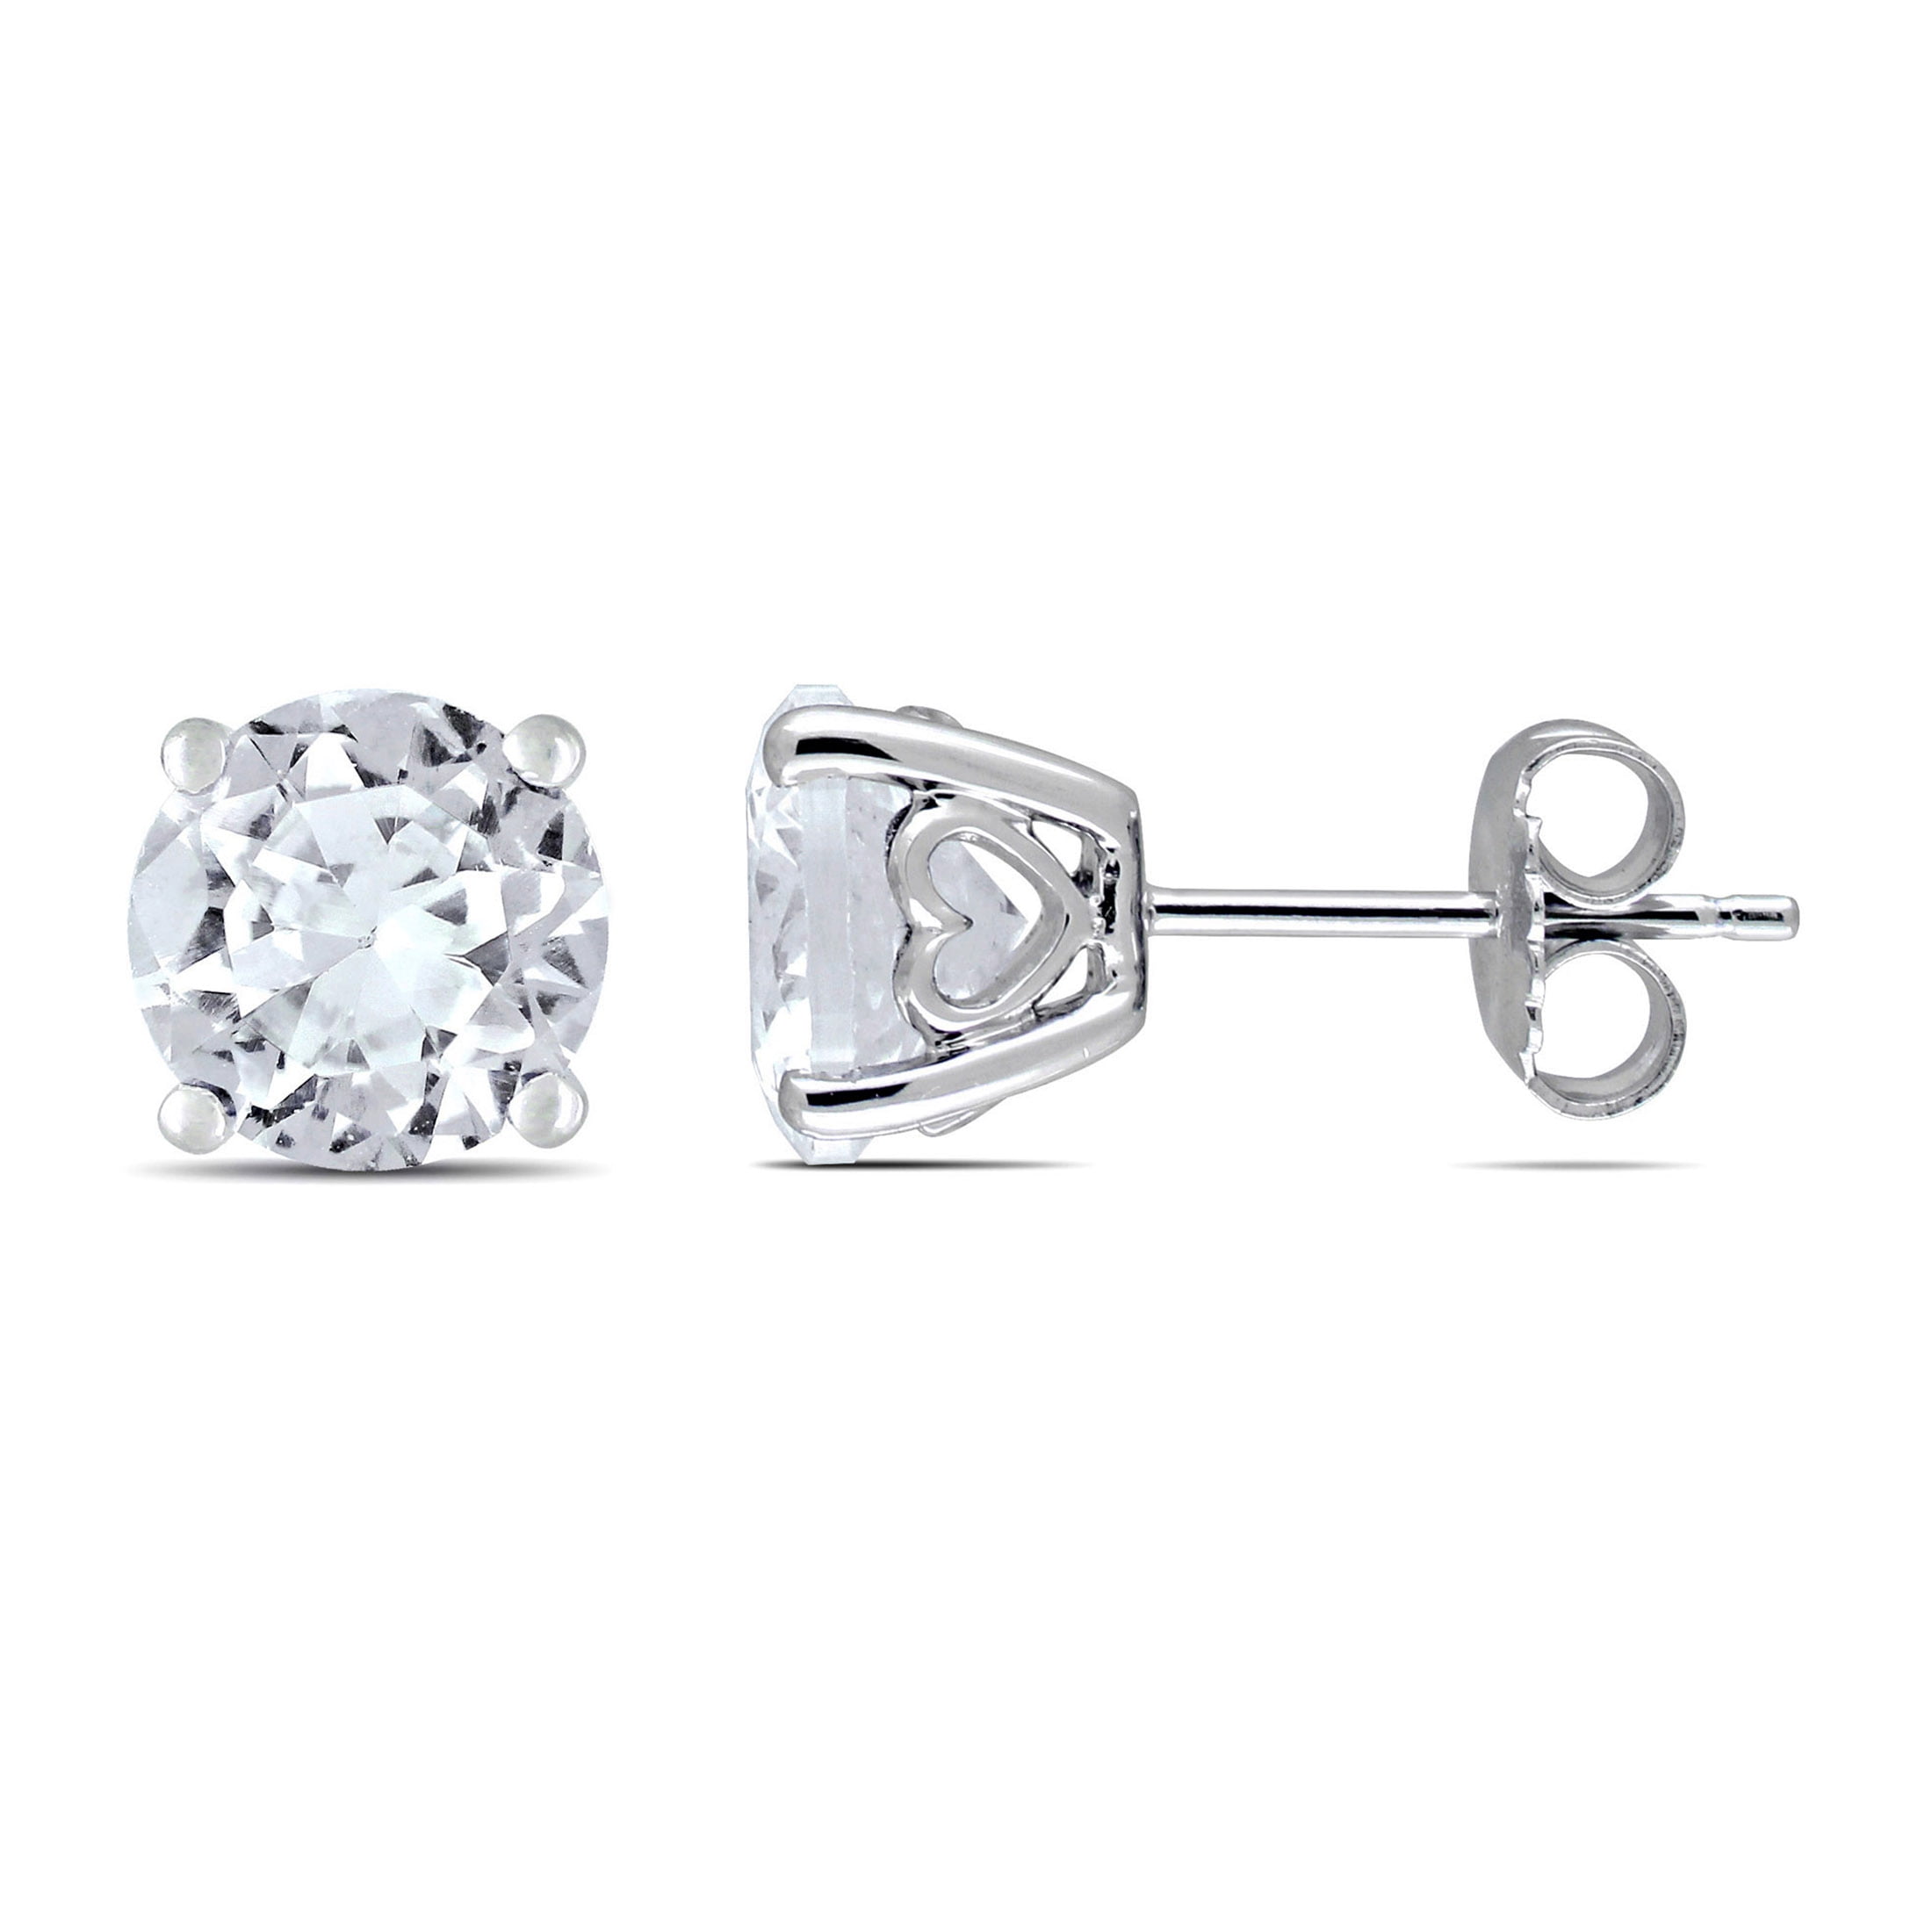 Amour Sterling Silver 1 1/8ct TGW Peridot and Diamond Accent Stud Earrings